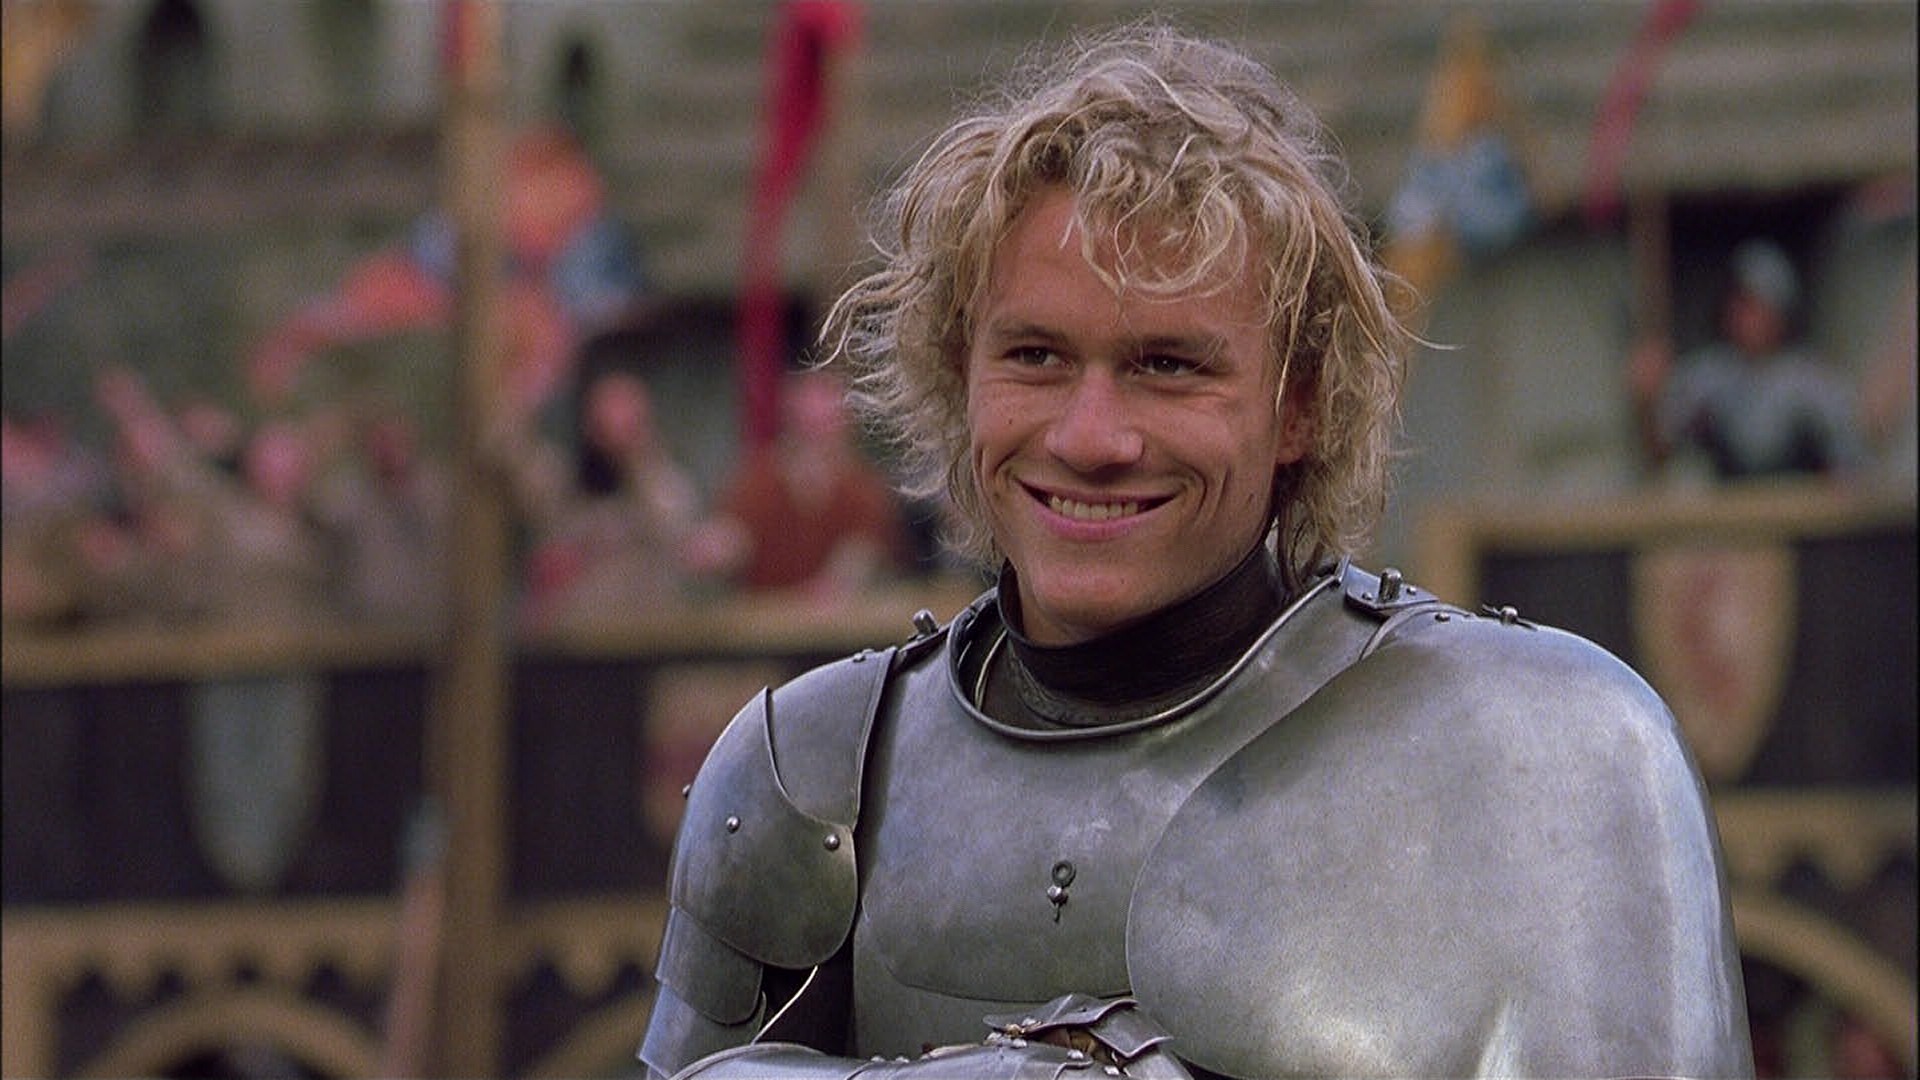 A Knight's Tale Backgrounds, Compatible - PC, Mobile, Gadgets| 1920x1080 px